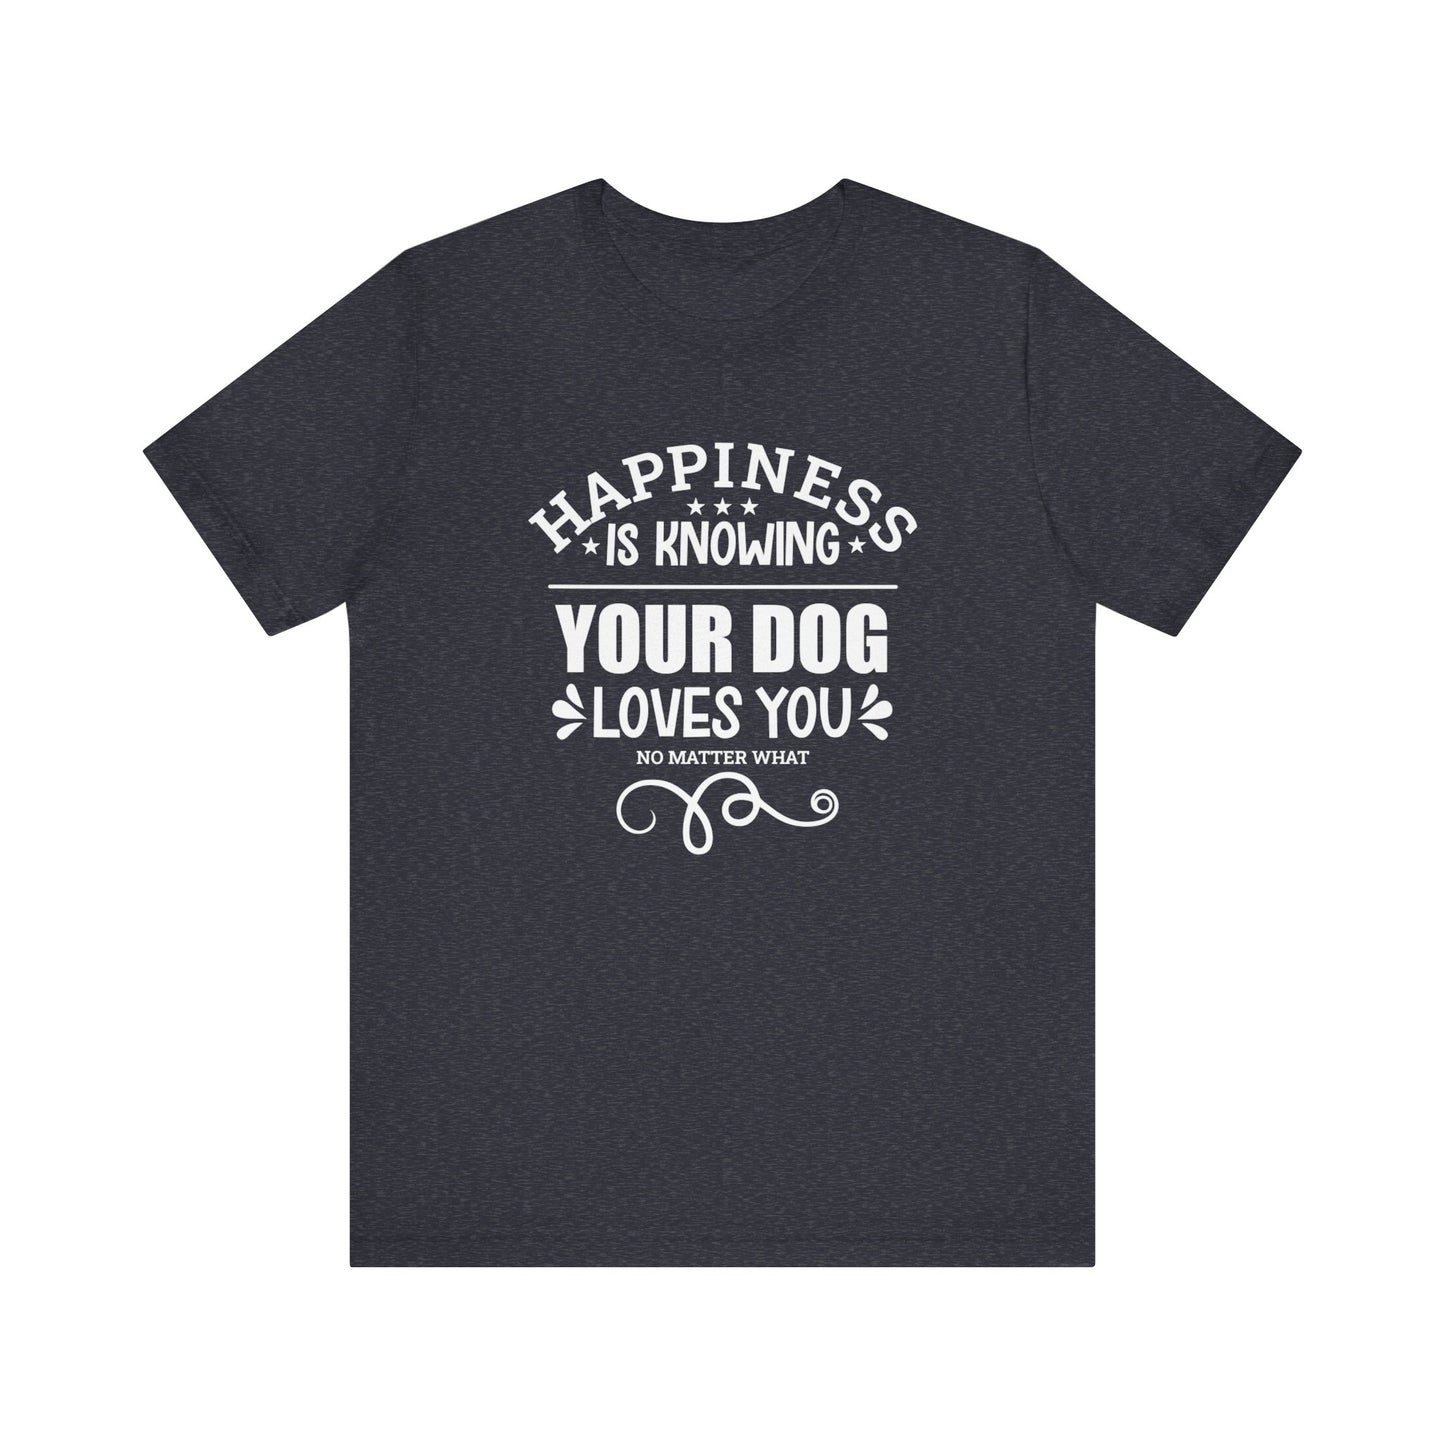 Displayed is a heather navy unisex tee, featuring the slogan 'Happiness is knowing your dog loves you no matter what,' by Dogs Pure Love, against a white backdrop.